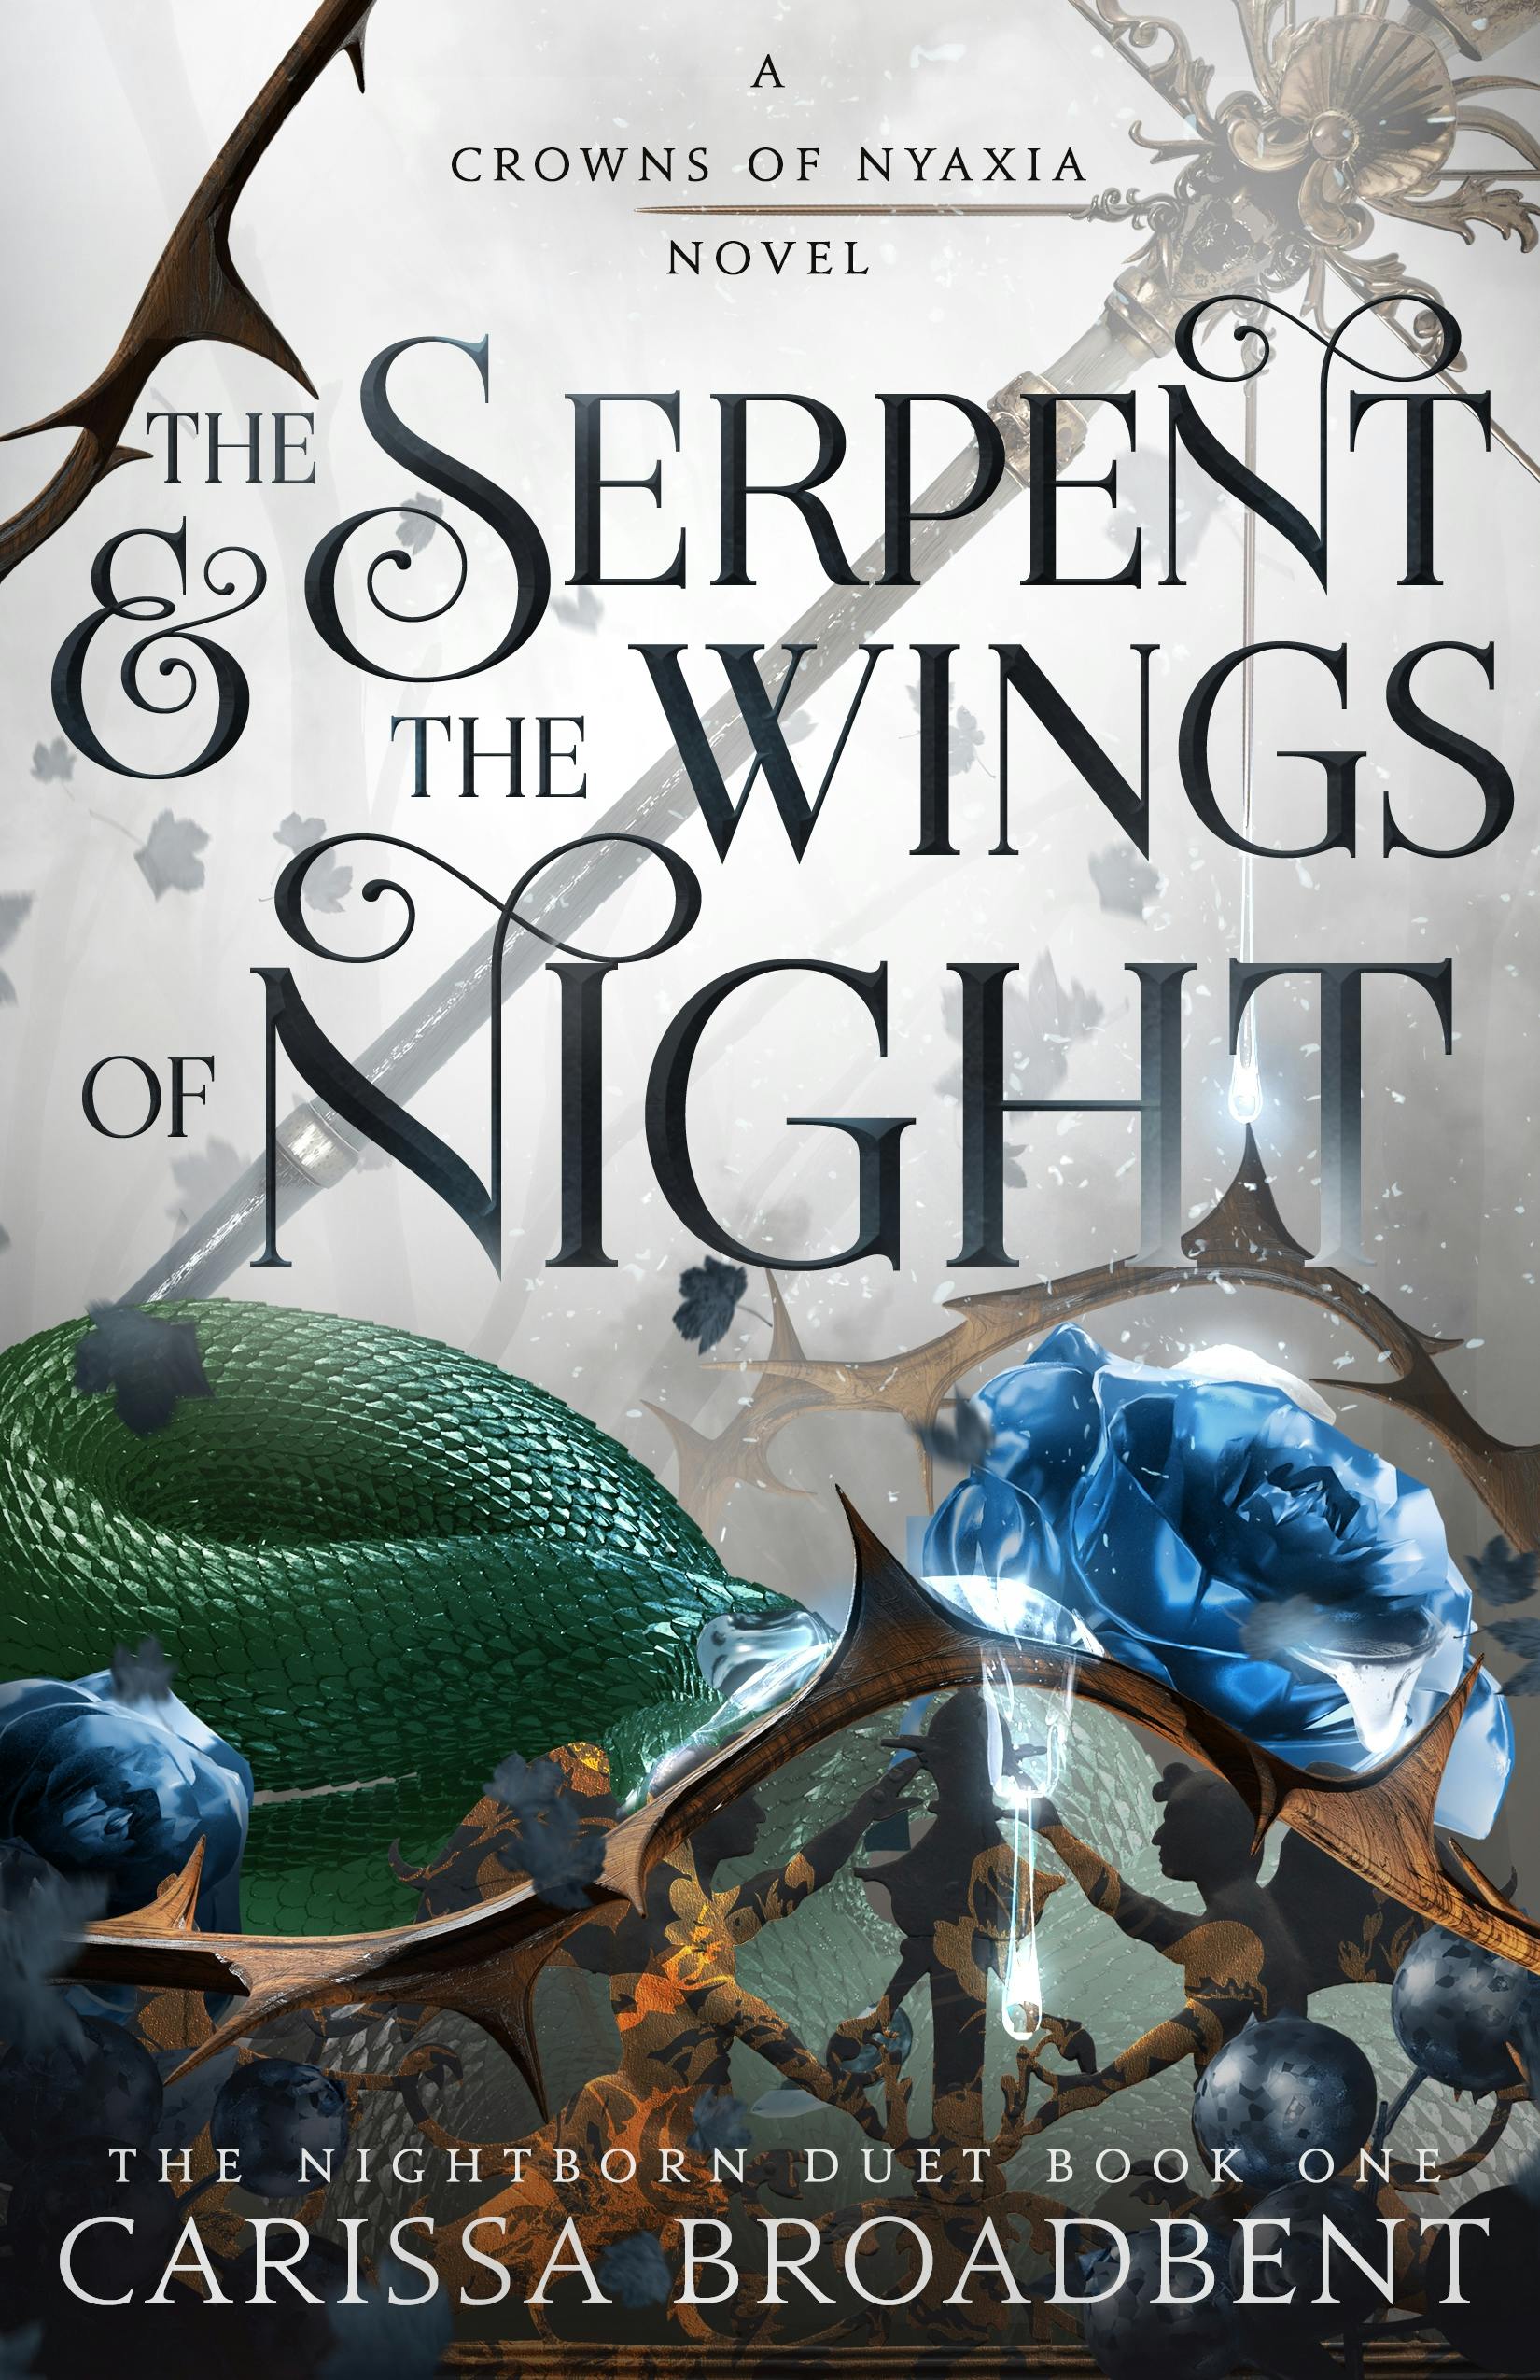 Cover for the book titled as: The Serpent & the Wings of Night